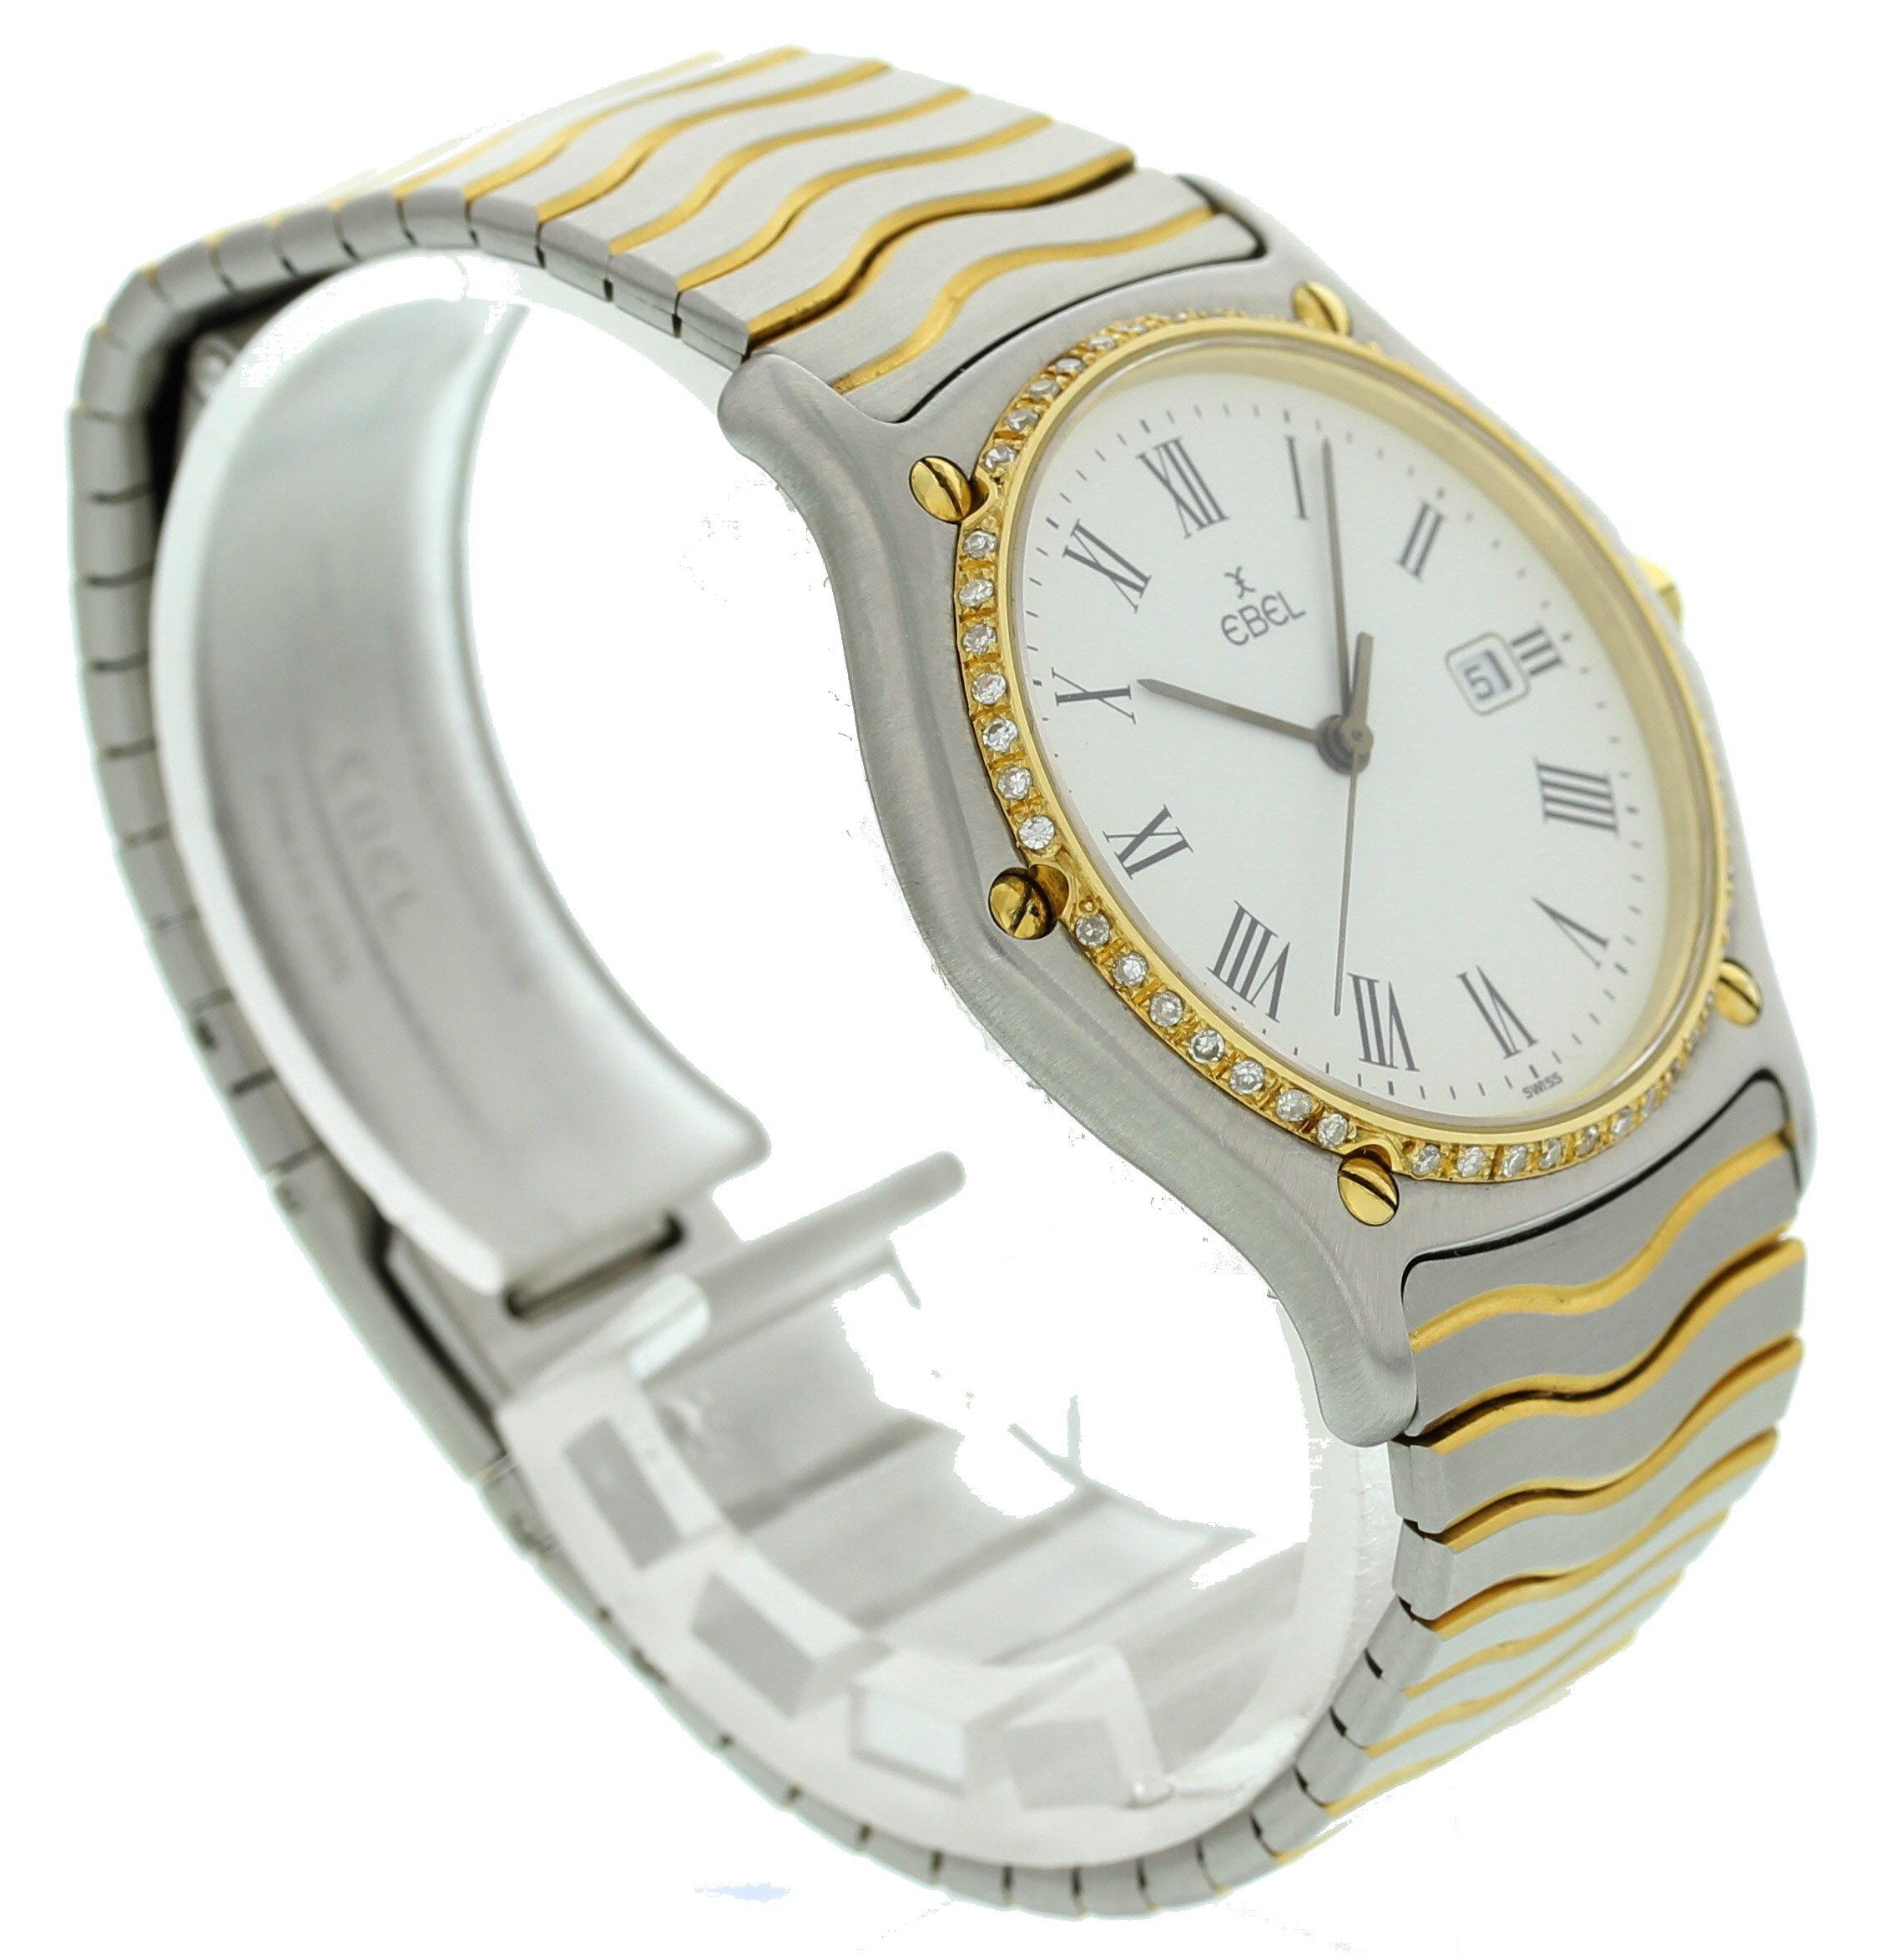 Unisex Ebel Sportswave 183903. 34 mm stainless steel case. 18K yellow gold bezel with custom set diamonds. Yellow gold dial with black hands and Roman numeral markers. Features a date display. 18K yellow gold & stainless steel band with hidden